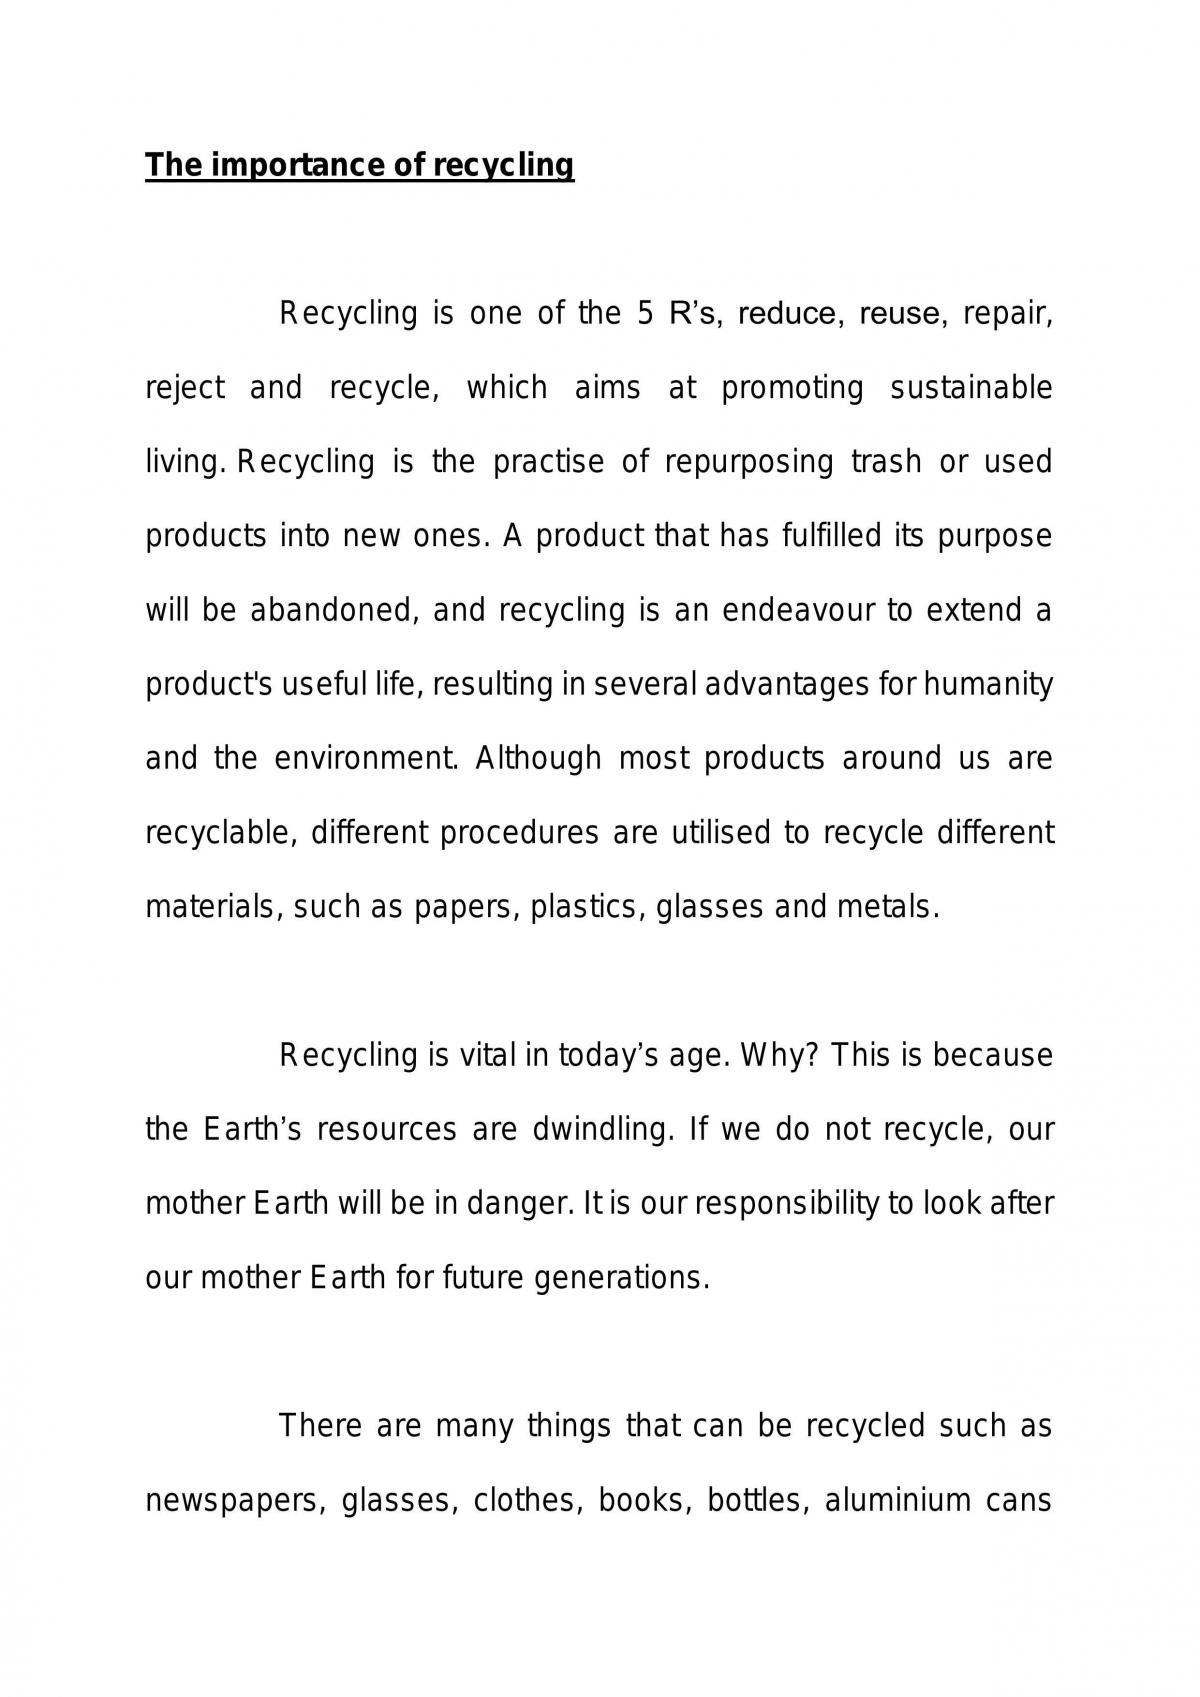 good hook for recycling essay